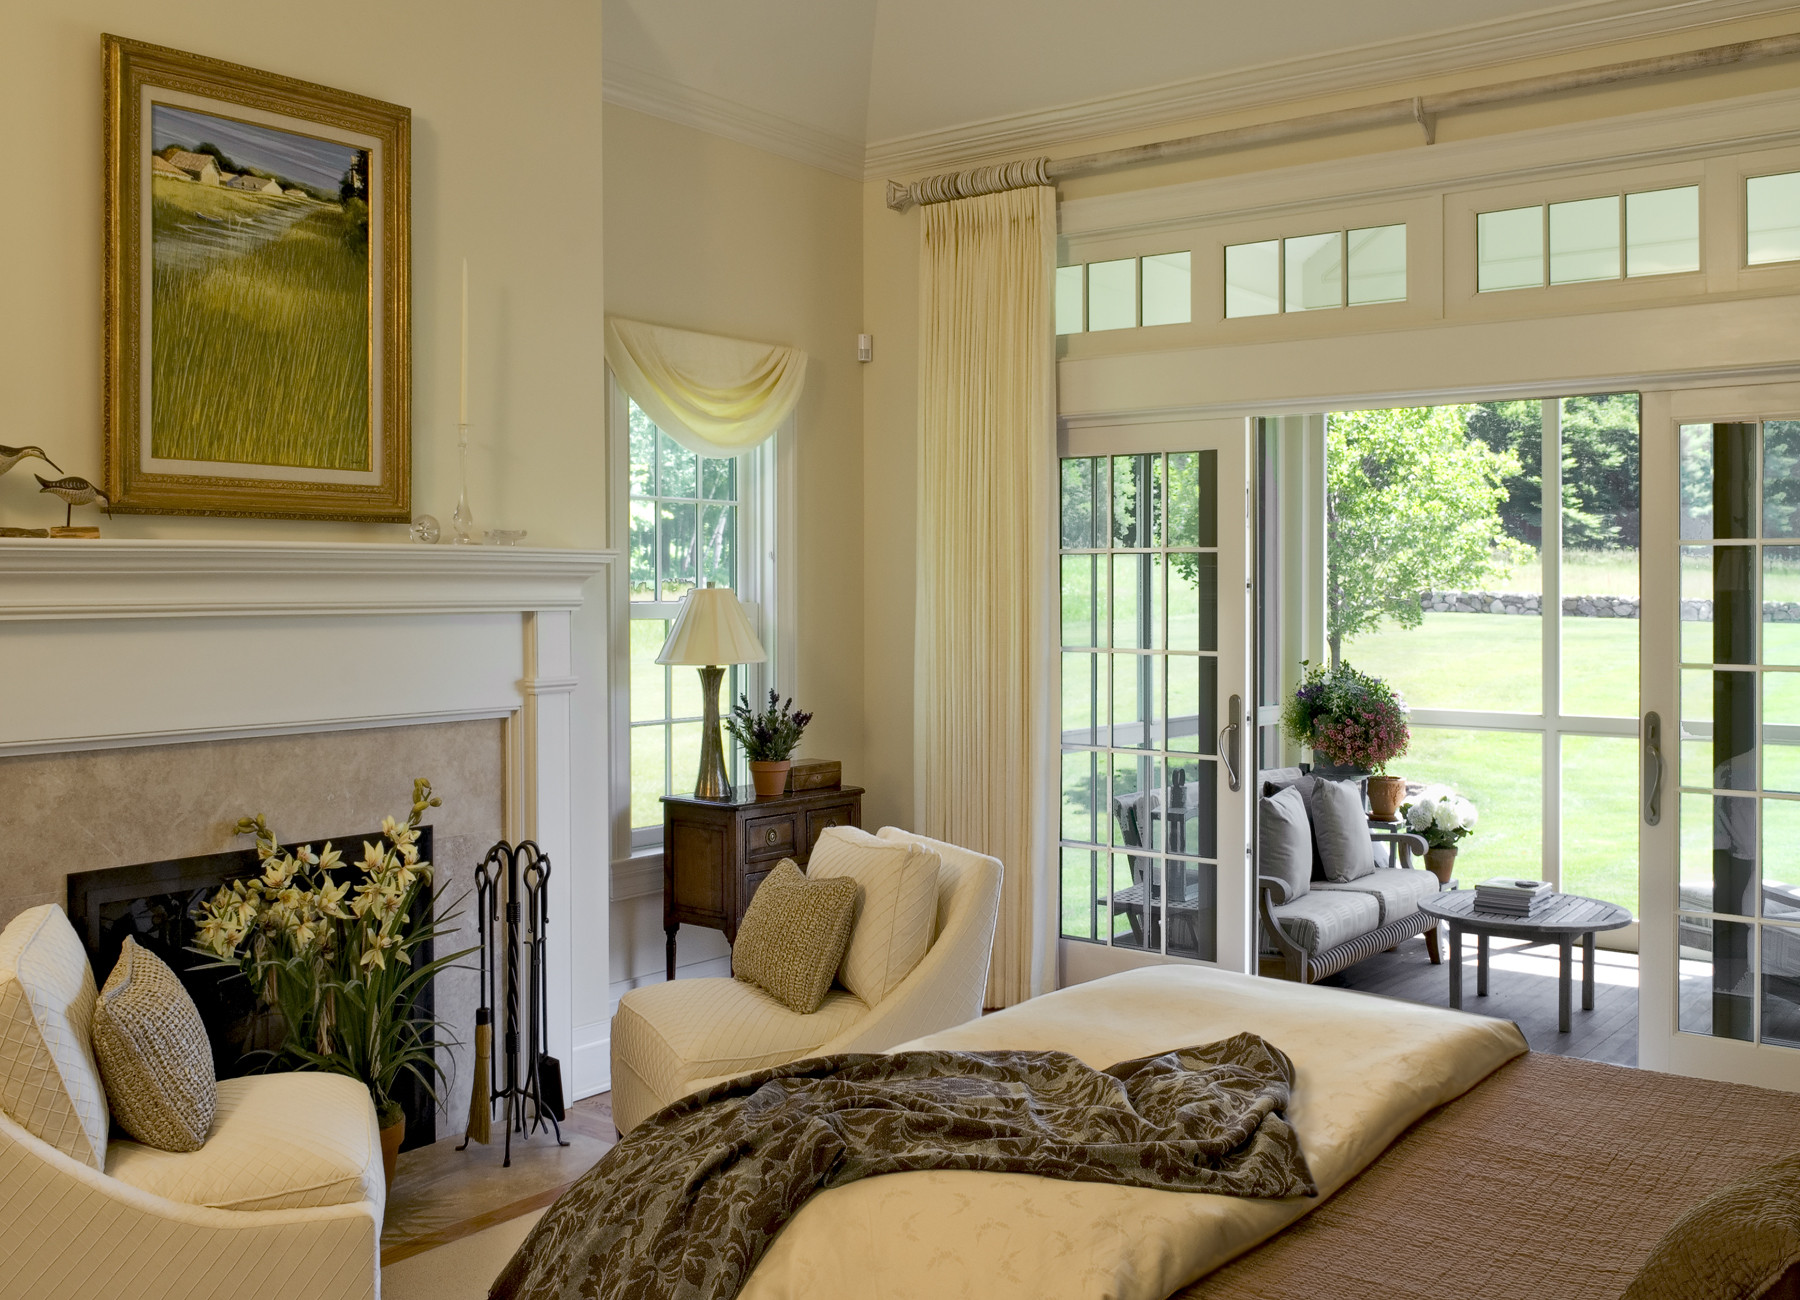 Master Bedroom Windows
 5 Additions That Especially Add Value to a Home Revisited